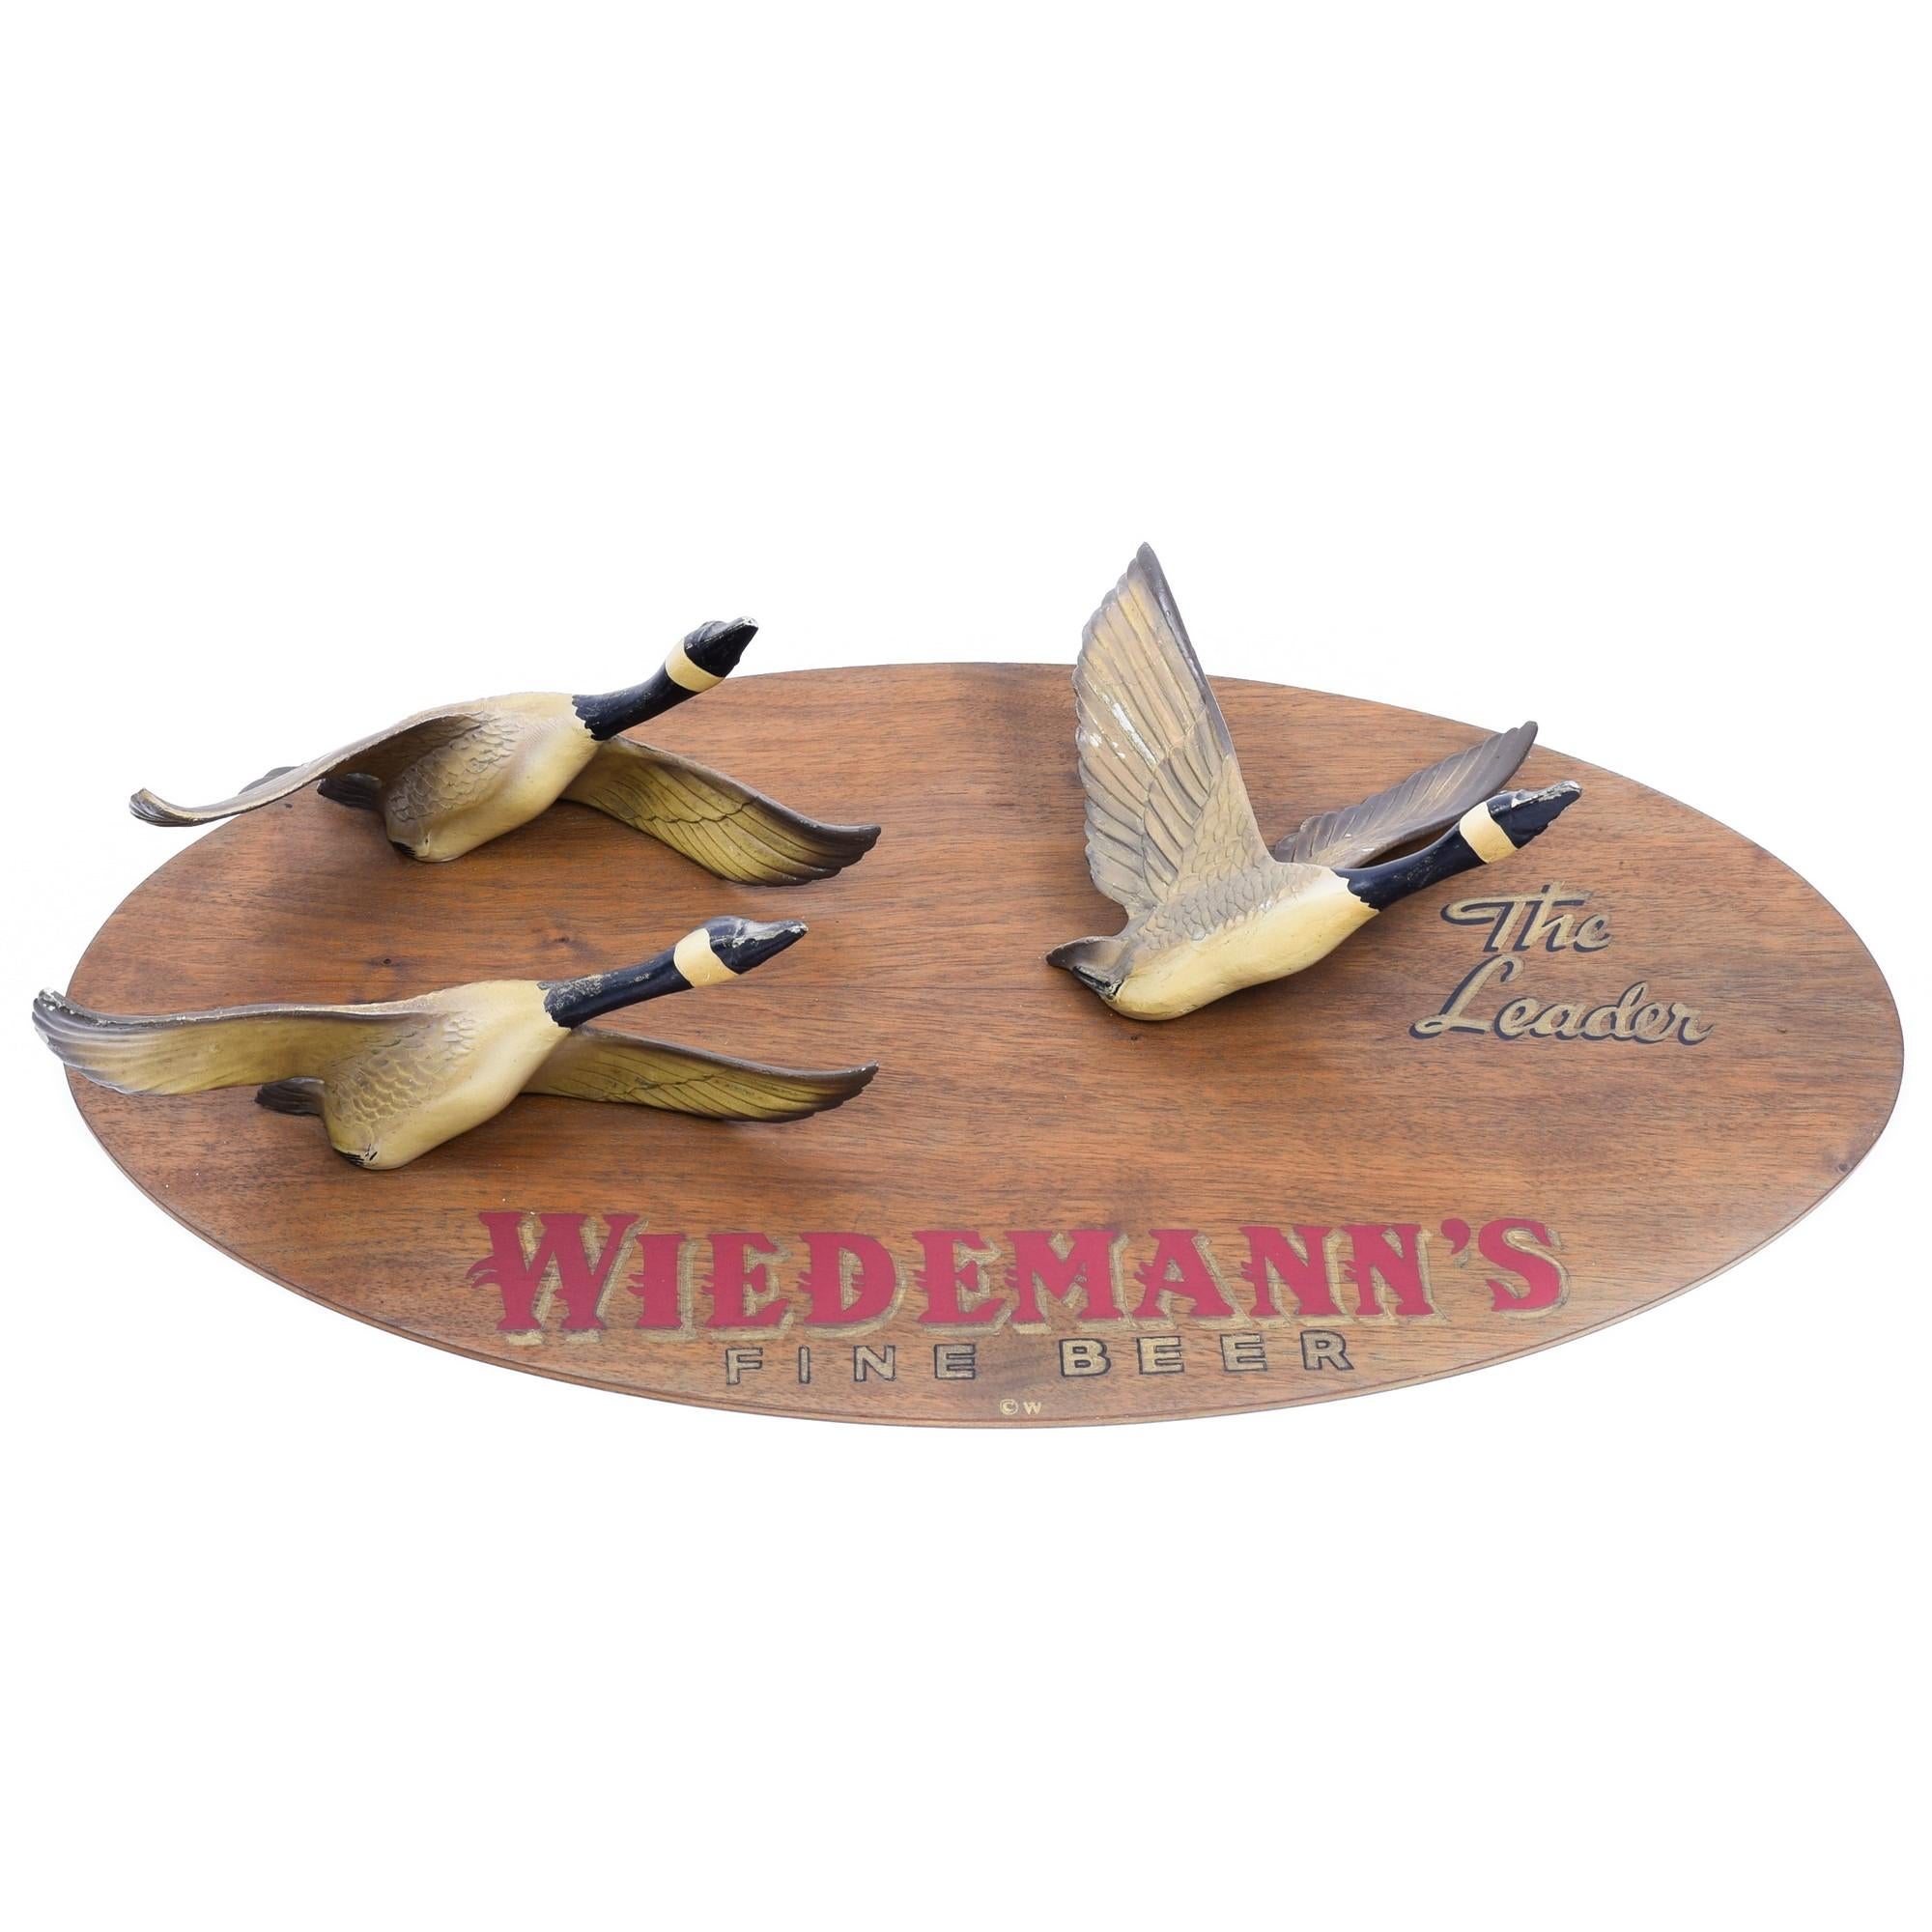 Wiedemann's Fine beer - The Leader Trade sign with three Canada geese on oval walnut plaque. 

German immigrant George Wiedemann began brewing at the original Wiedemann brewery in Newport, Kentucky in 1870. Today, 150 years later, we remain